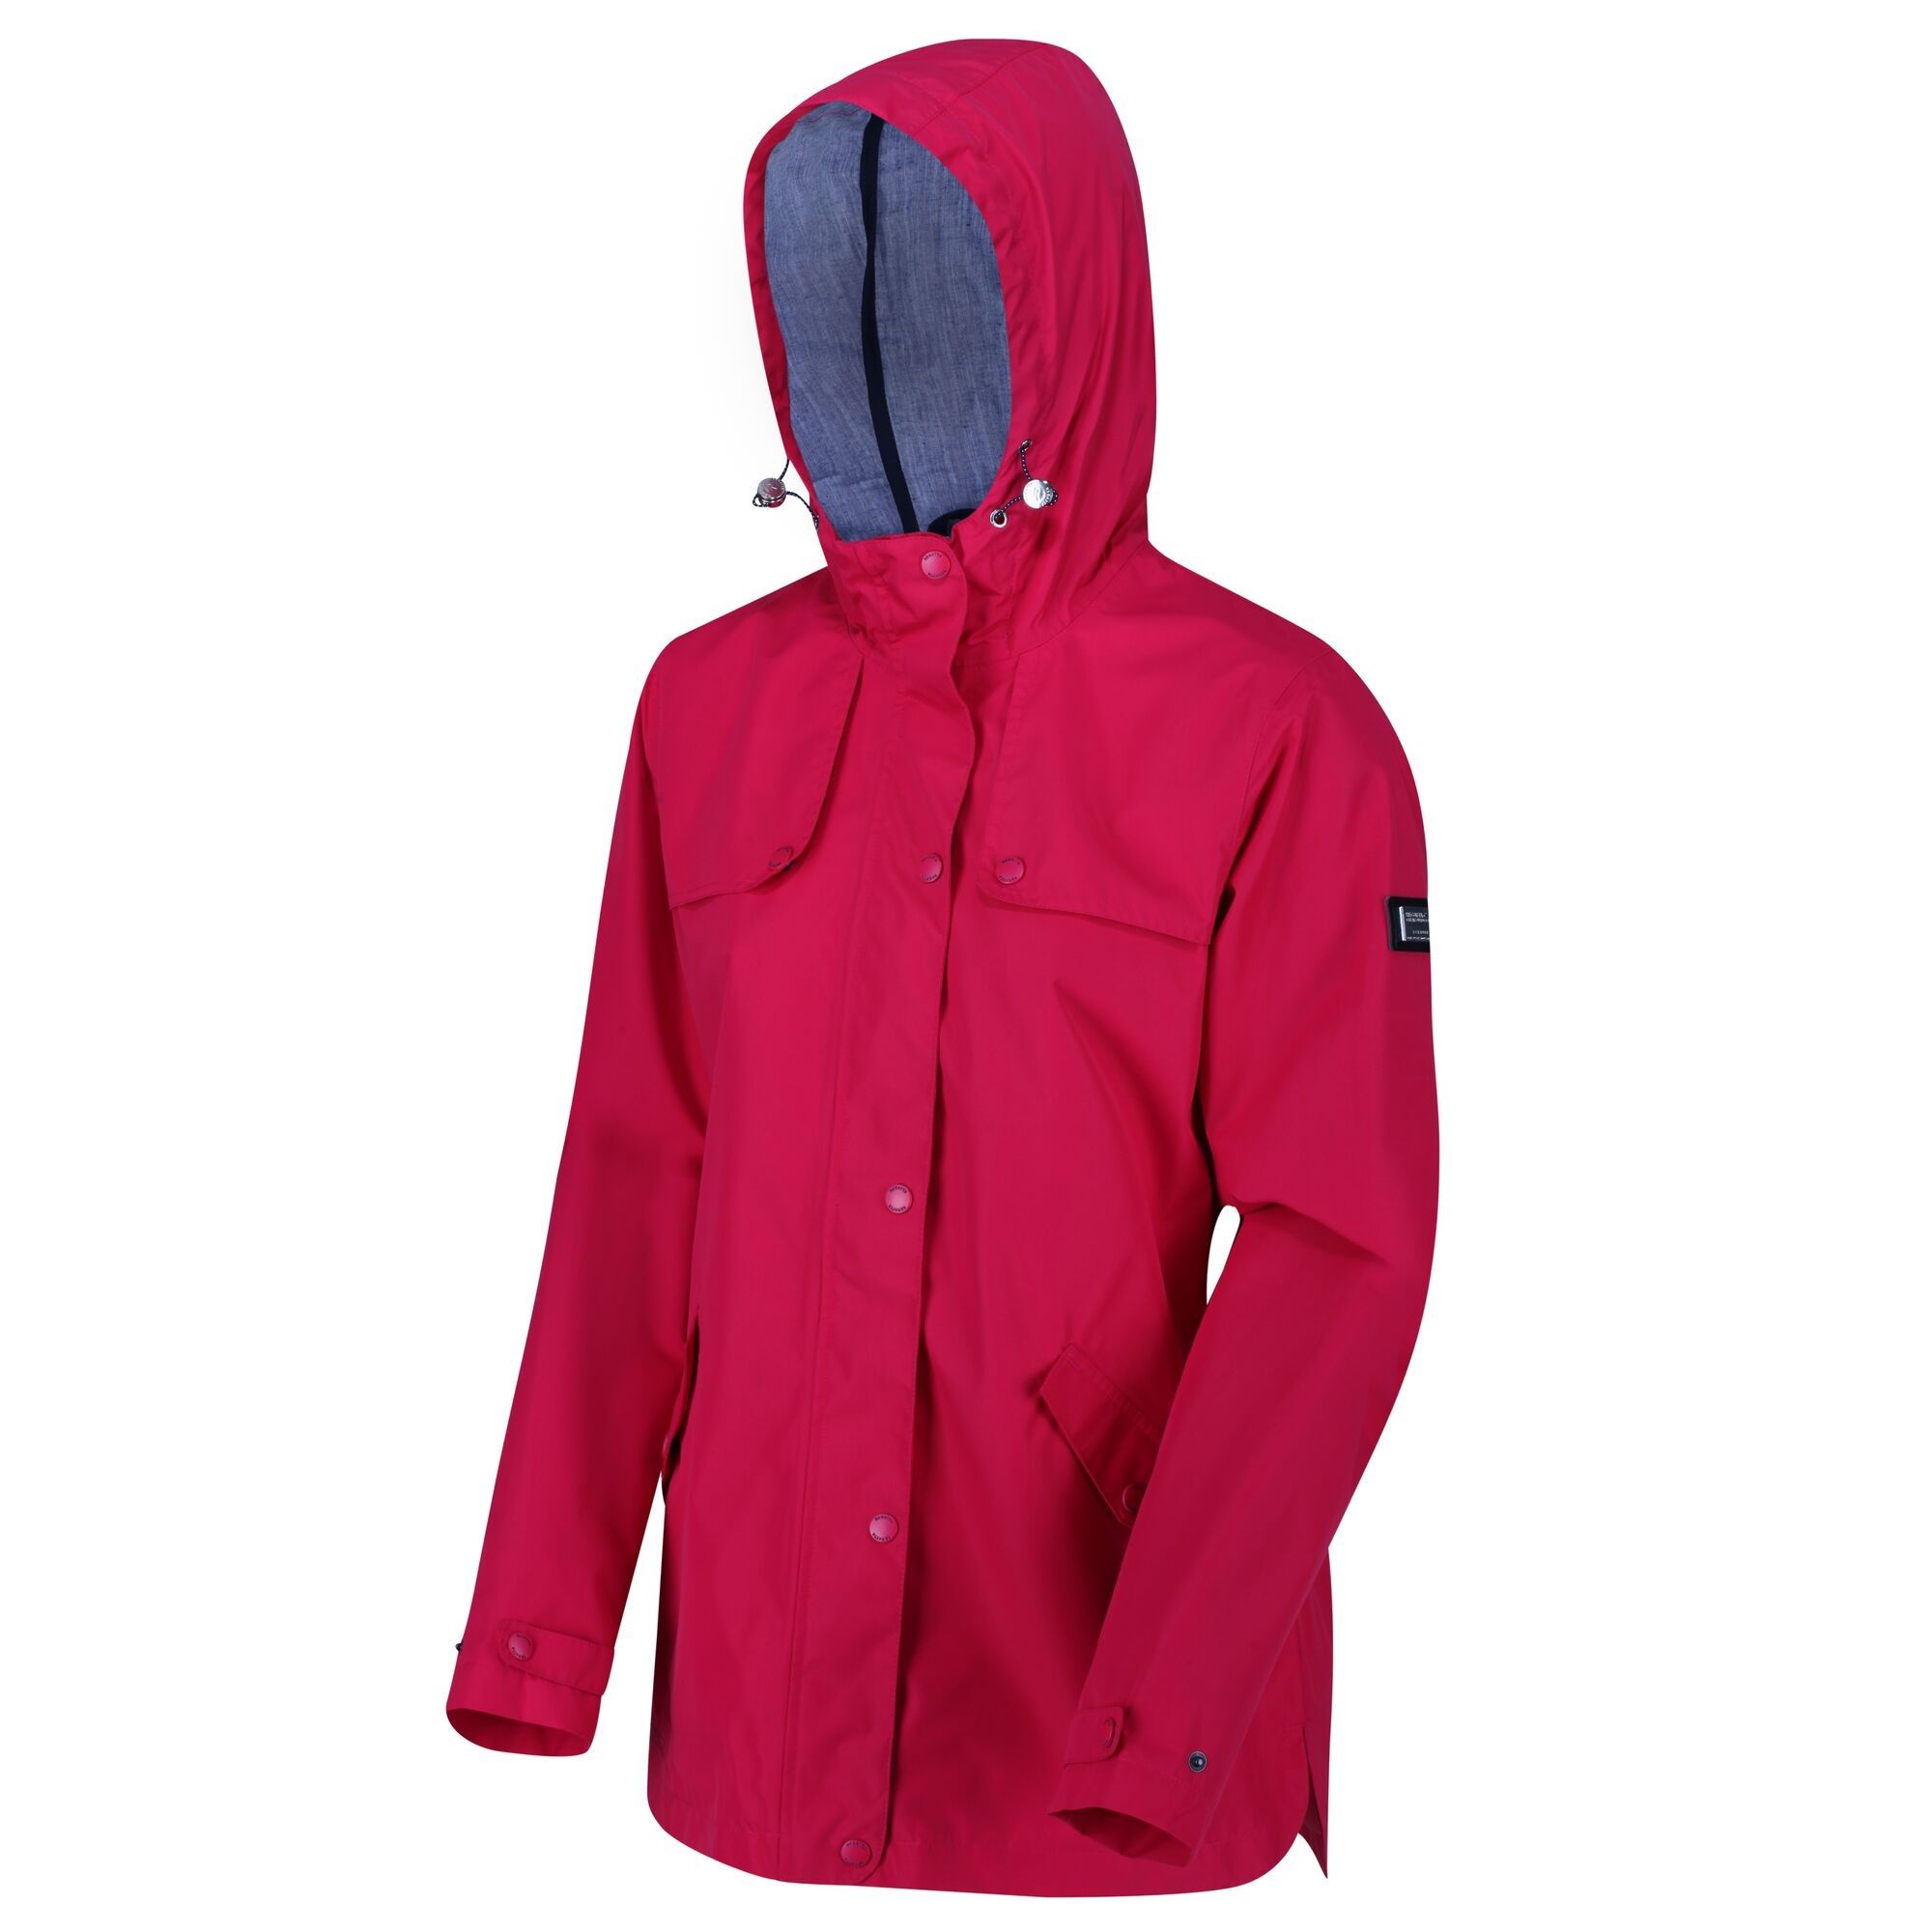 Material: 100% polyester. Breathability rating 5,000g/m2/24hrs. Durable water repellent finish. Taped seams. Part cotton chambray, part polyester taffeta lining. Internal security pocket. Grown on hood with adjusters. Adjustable cuffs. 2 lower pockets with flaps and branded snap fastening.